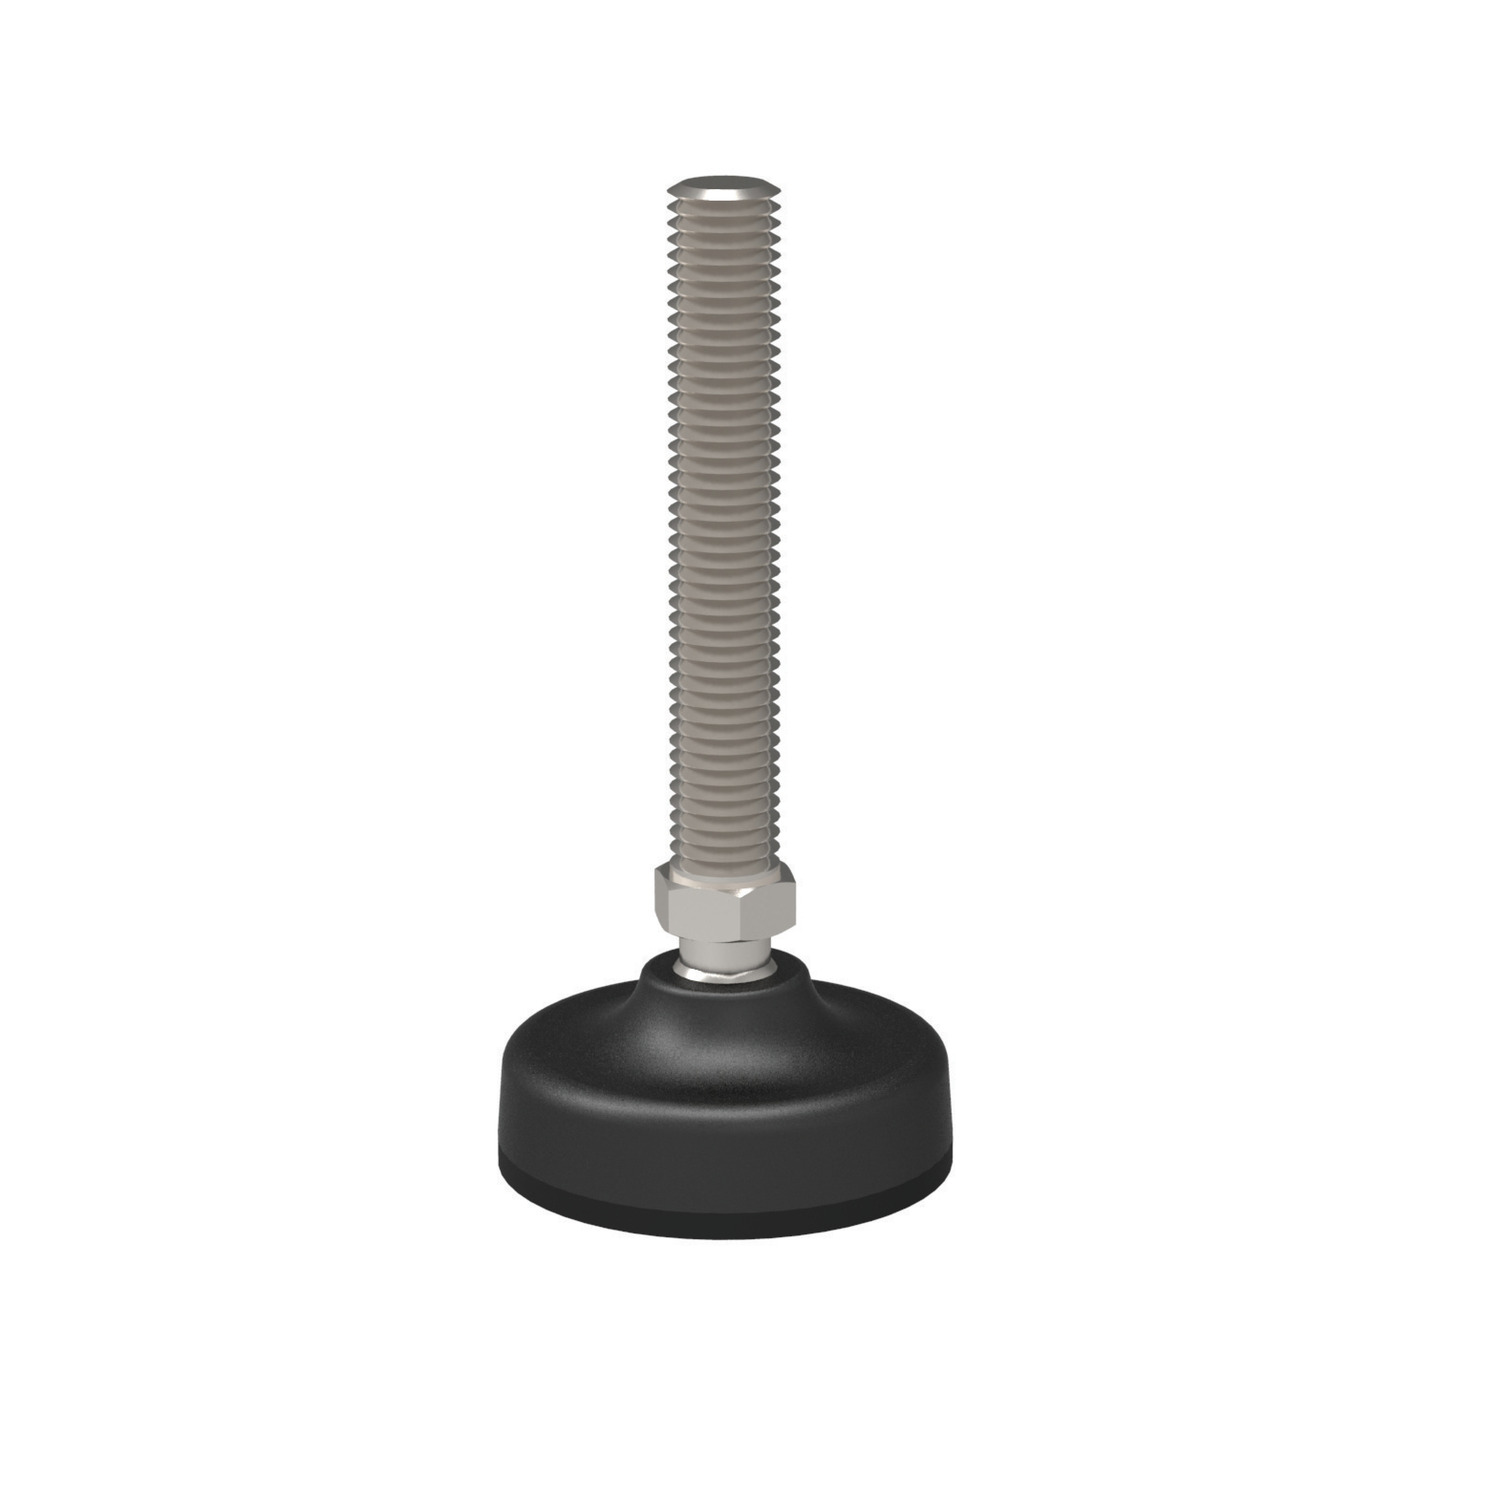 Machine Mount Reinforced polyamide levelling feet with stainless steel bolt (AISI 304). Thread bolt is fixed with a tolerance of 4° articulation.